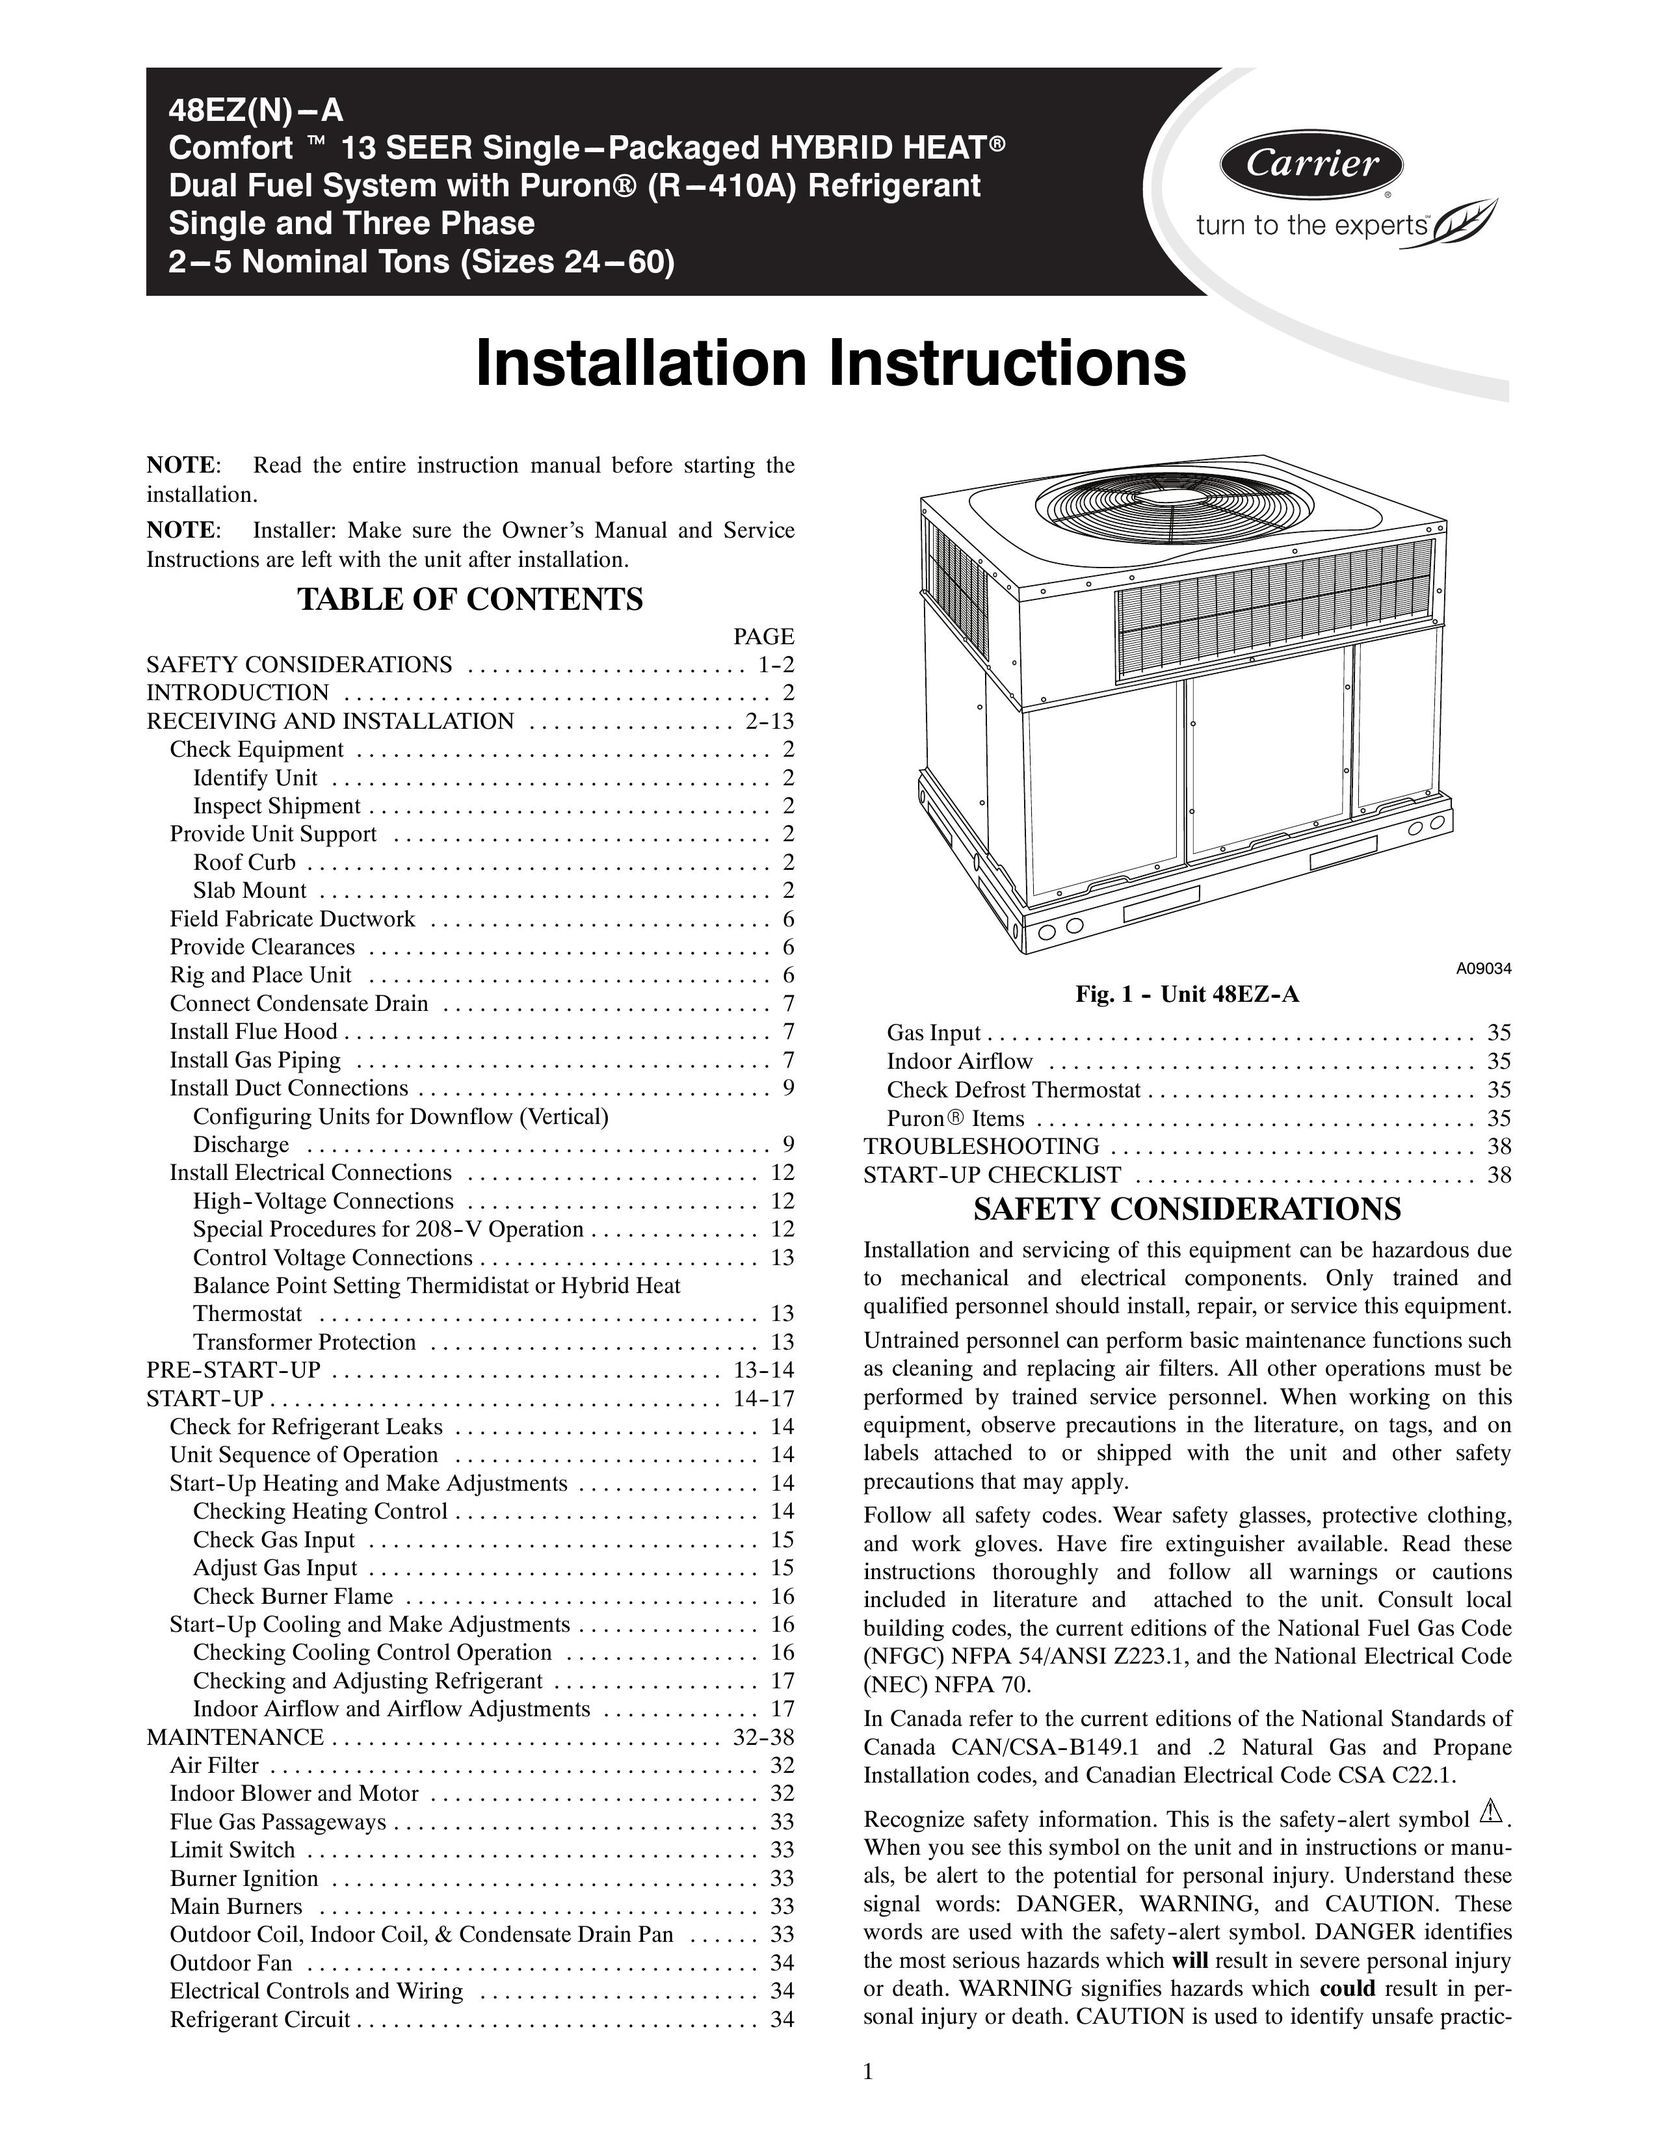 Carrier 48EZ(N)-A Electric Heater User Manual